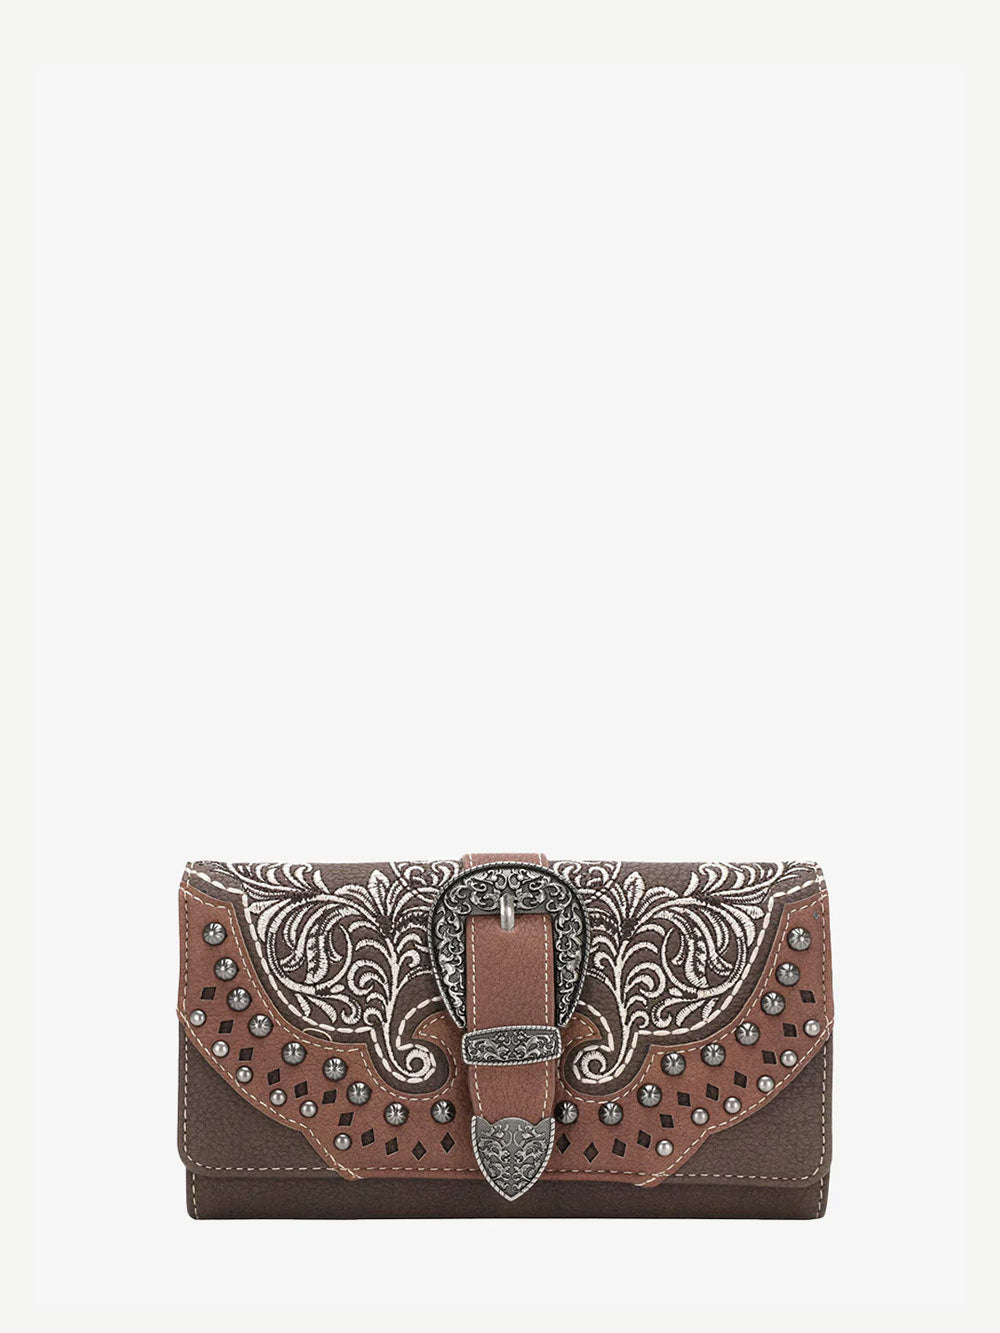 Montana West Vintage Floral Embroidered Buckle Wallet - Montana West World